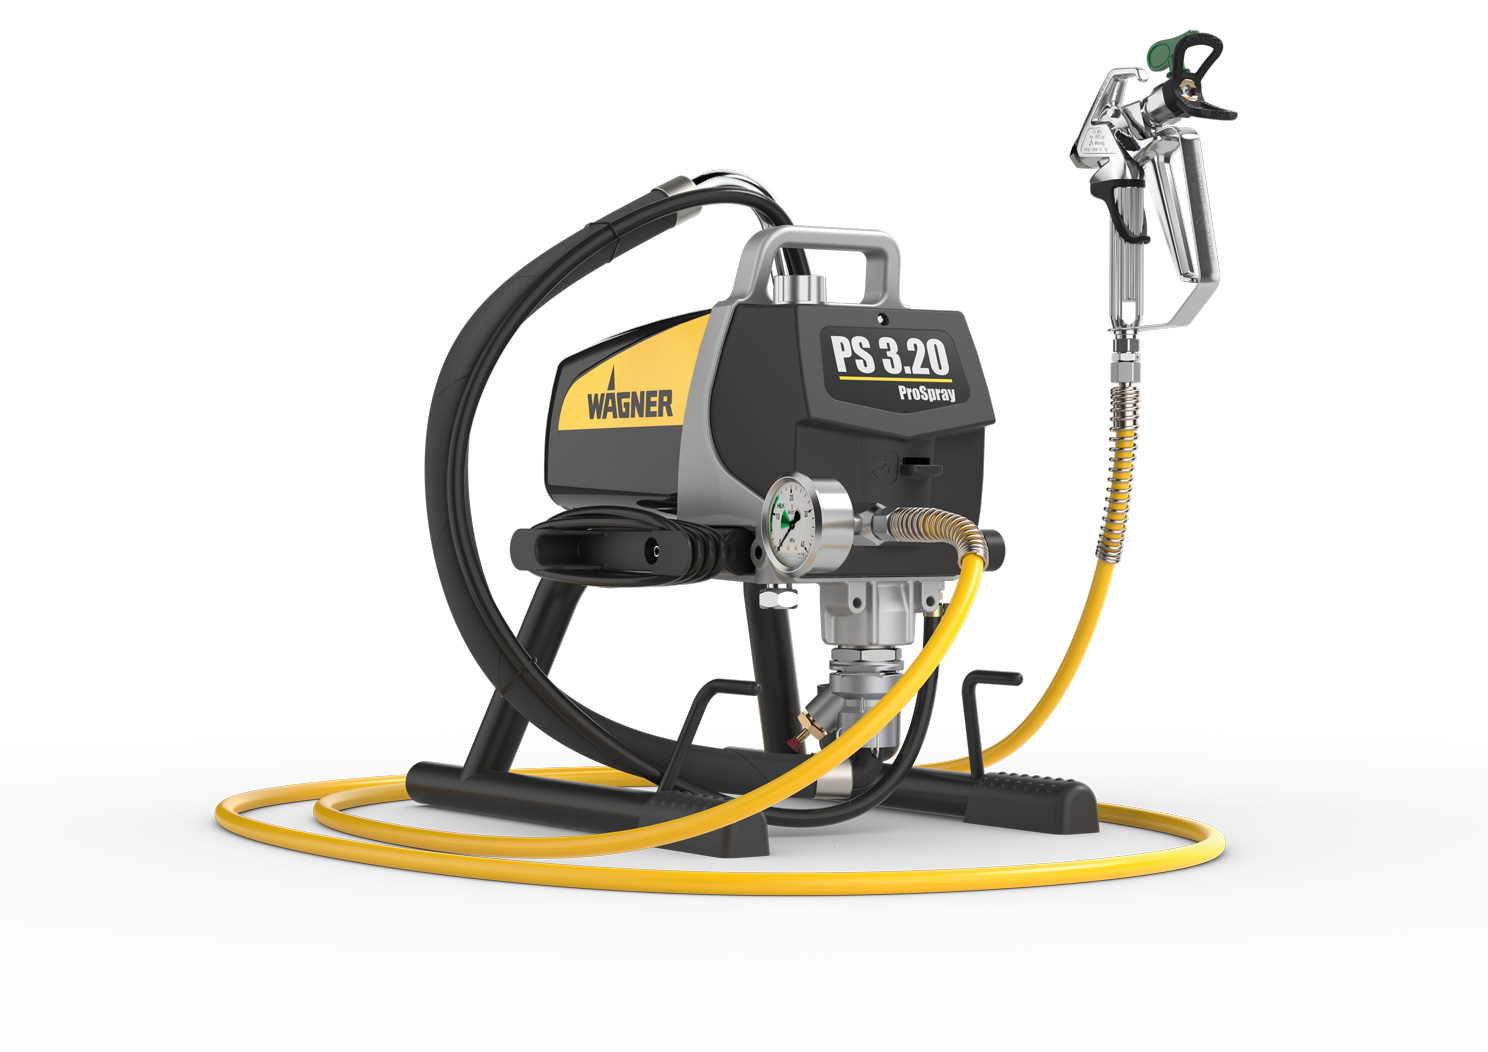 ProSpray PS 3.20 - Airless Paint Sprayer: Setup, Use & Clean with